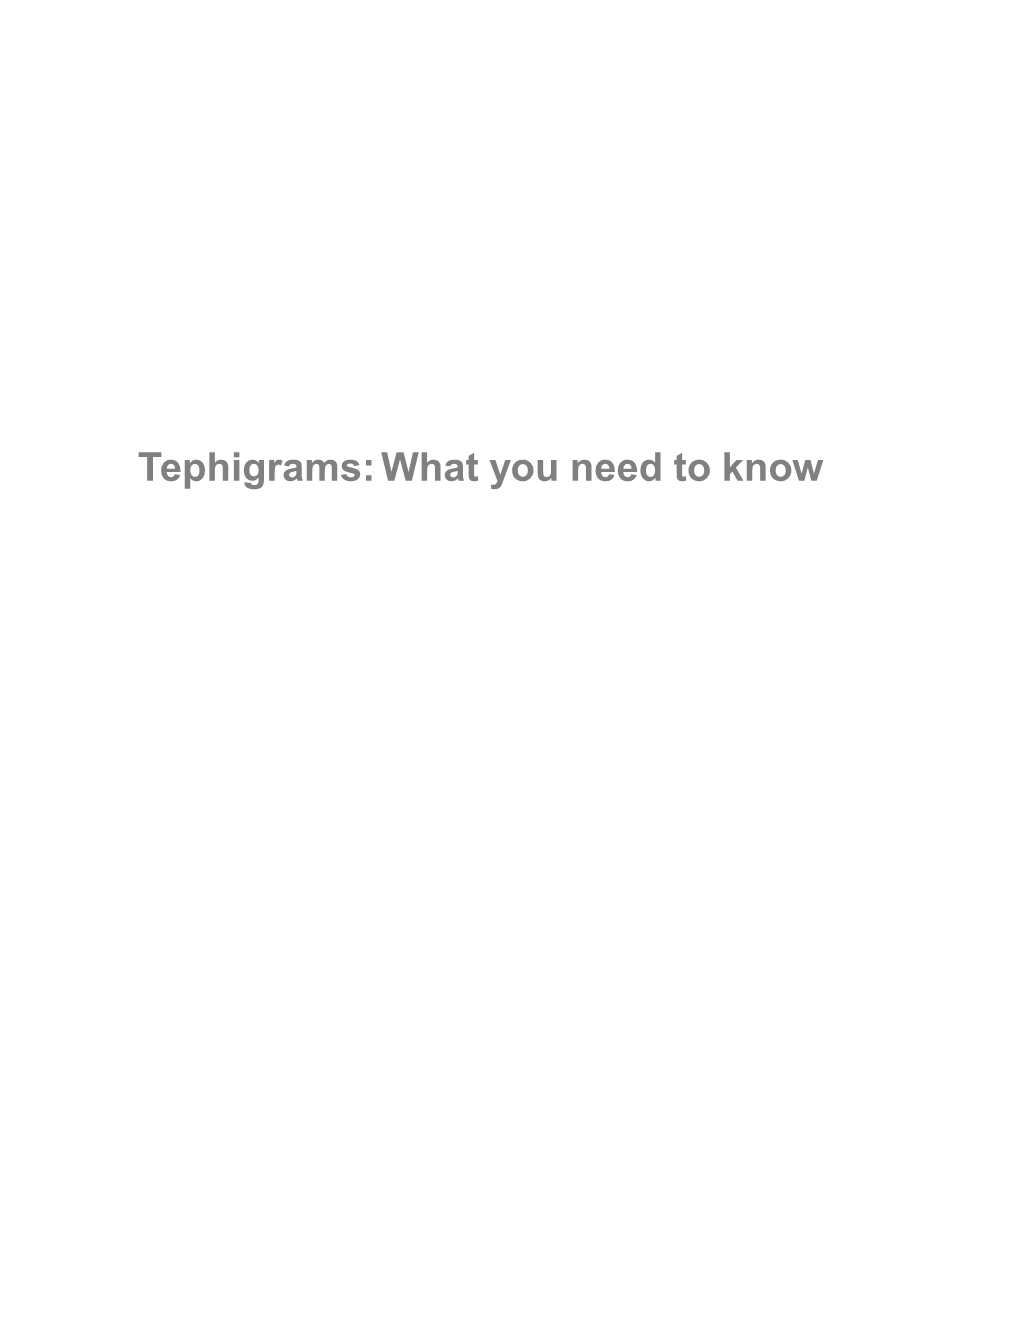 Tephigrams: What You Need to Know Contents